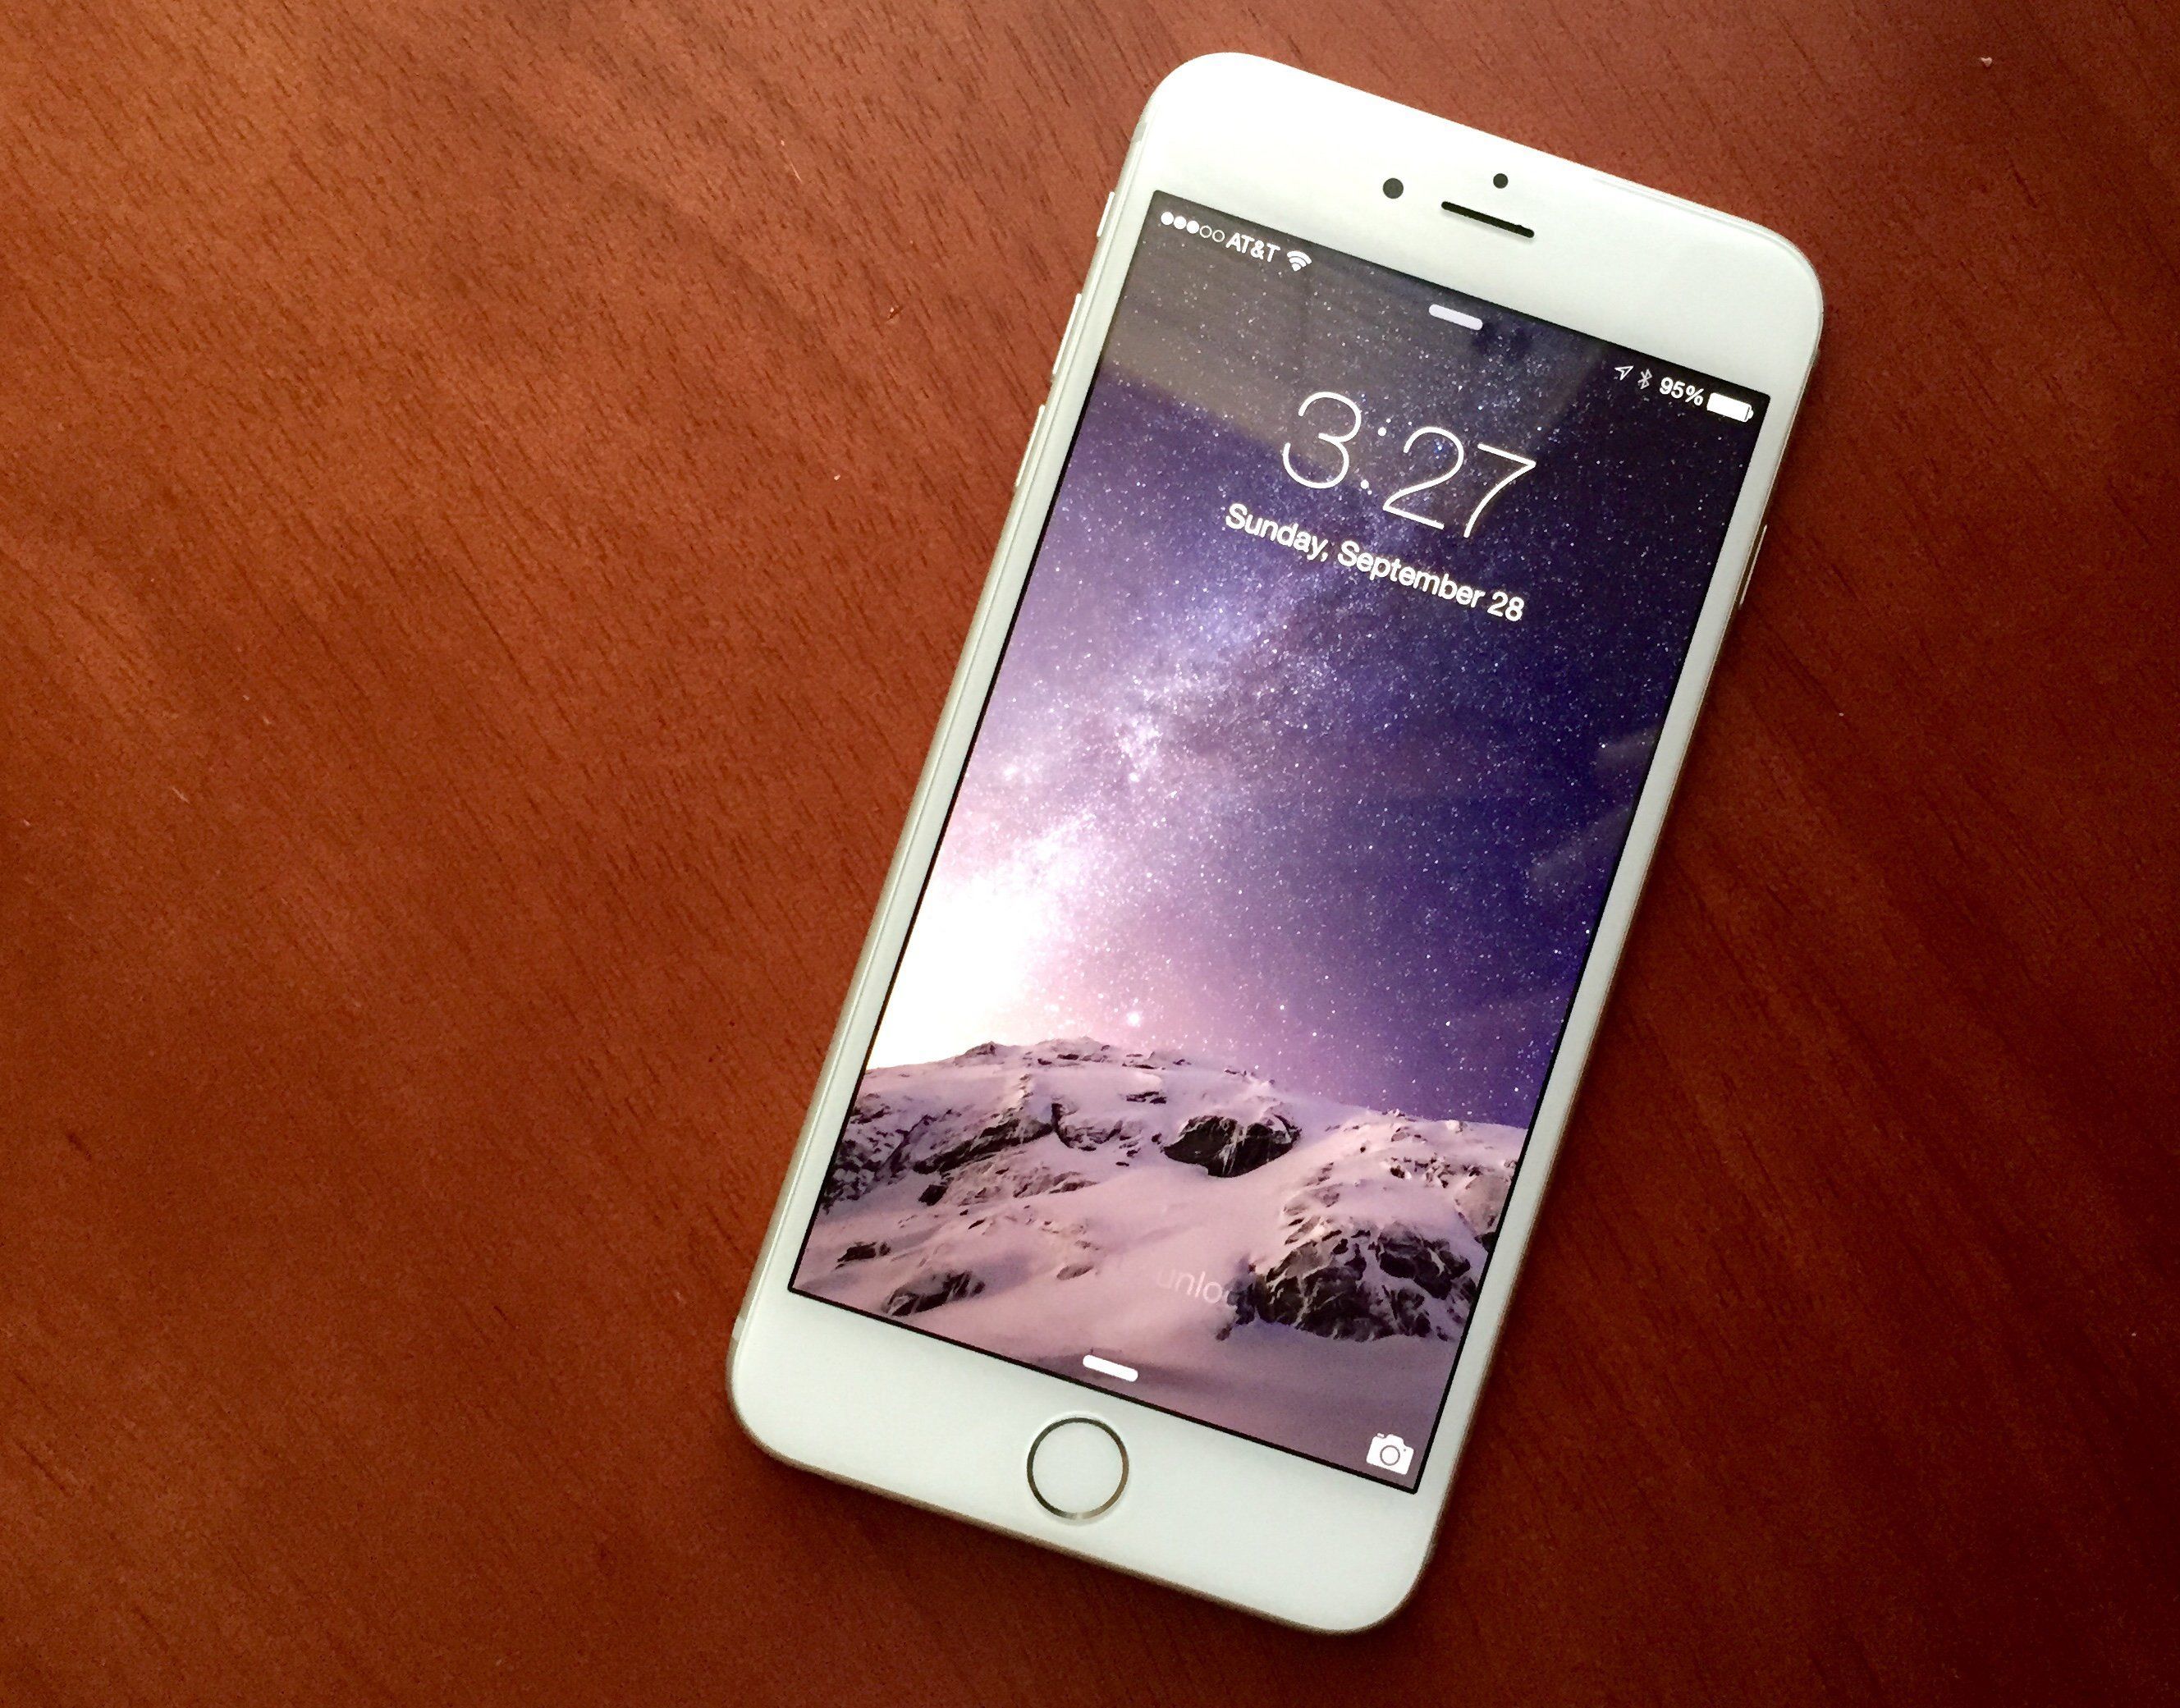 Learn how iOS 8.0.2 performs on the iPhone 6 Plus and what bugs remain.